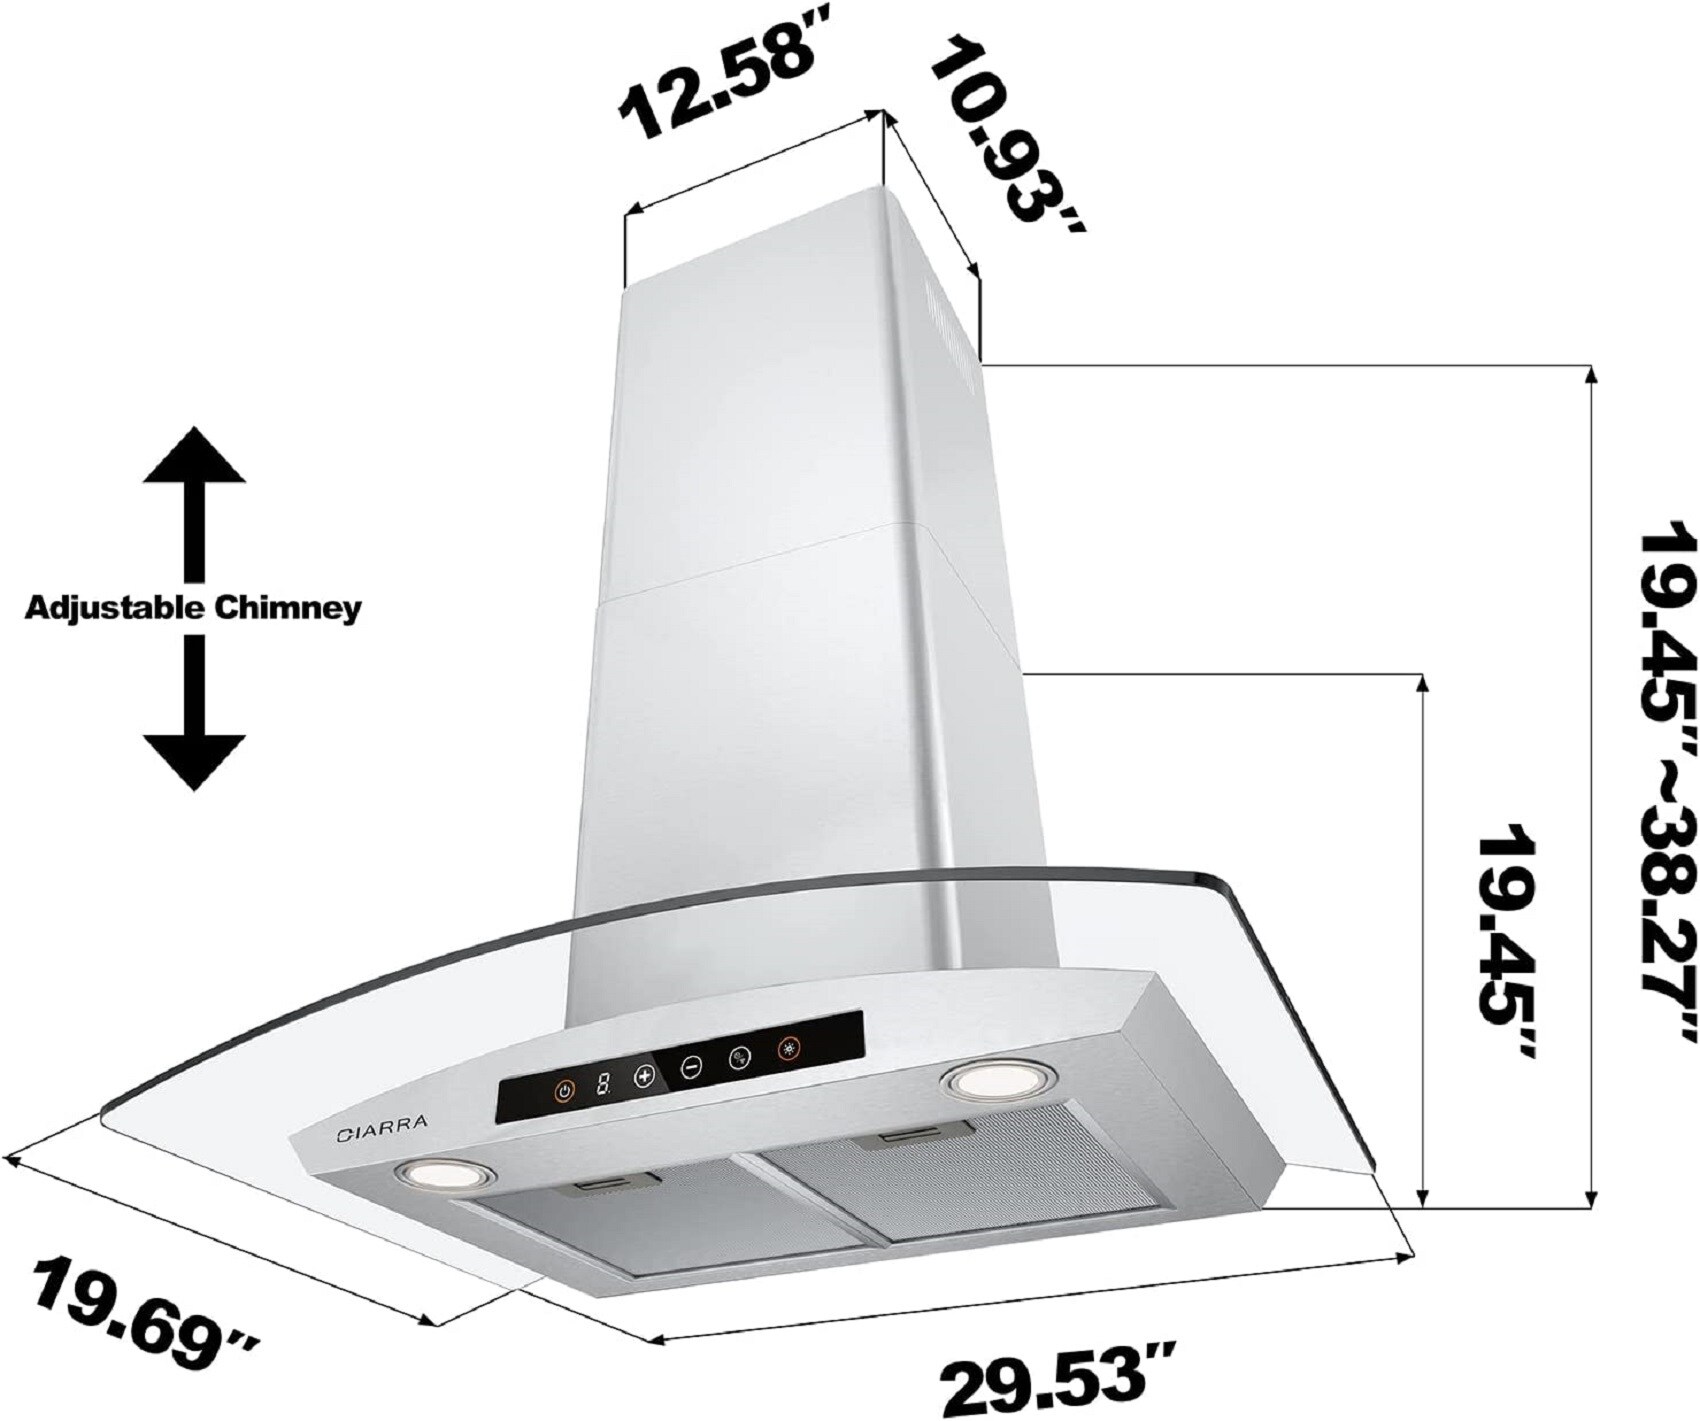 CIARRA 30 in. 450 CFM Convertible Smart Wall Mount Range Hood in Stainless  Steel with Voice and Touch Controls CAS75502W - The Home Depot